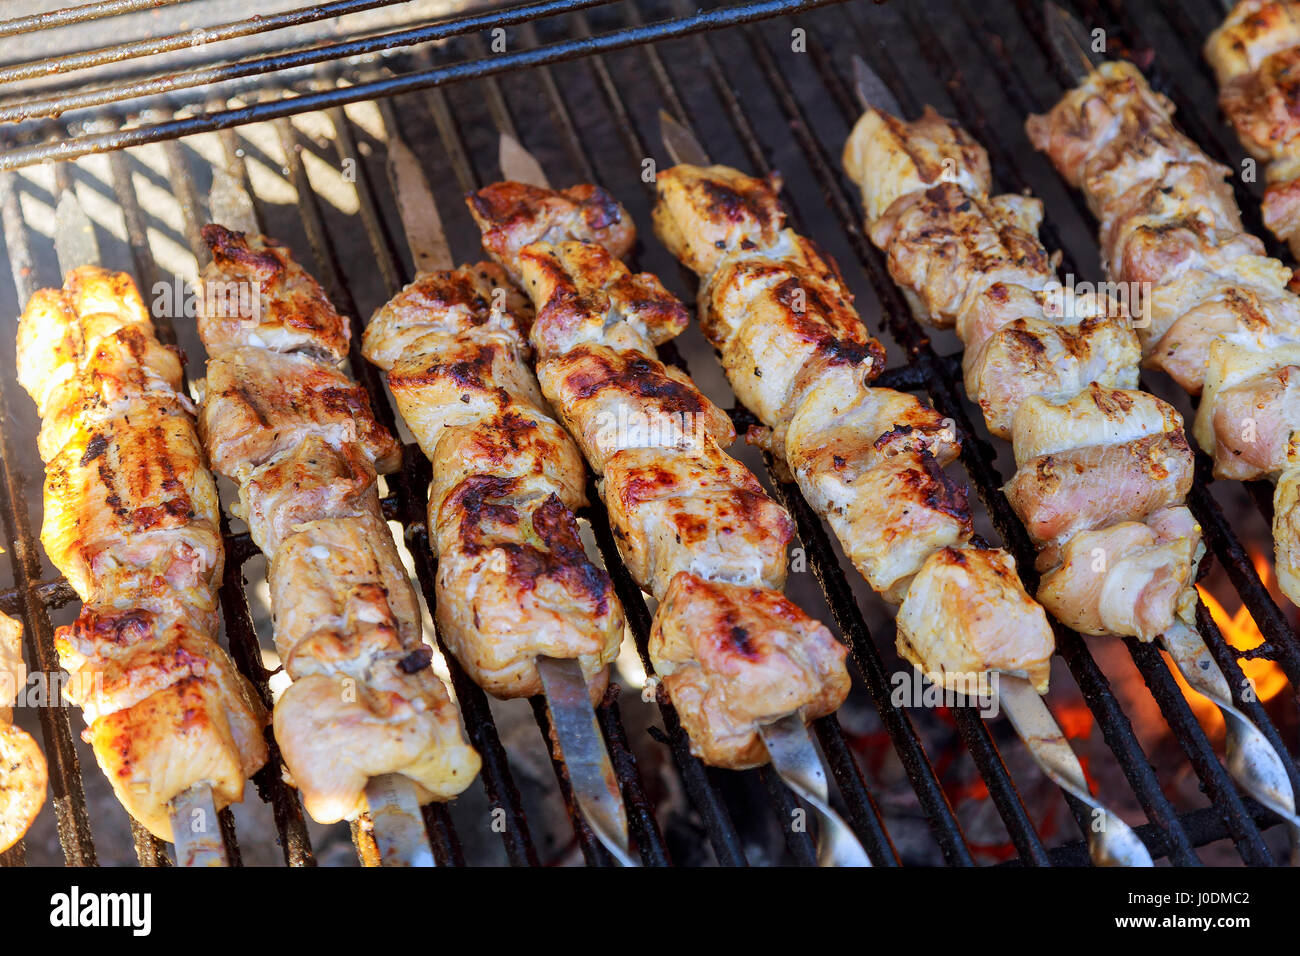 Grilled meats, hot pieces Barbecued Pork Kebab with meat skewers Stock Photo